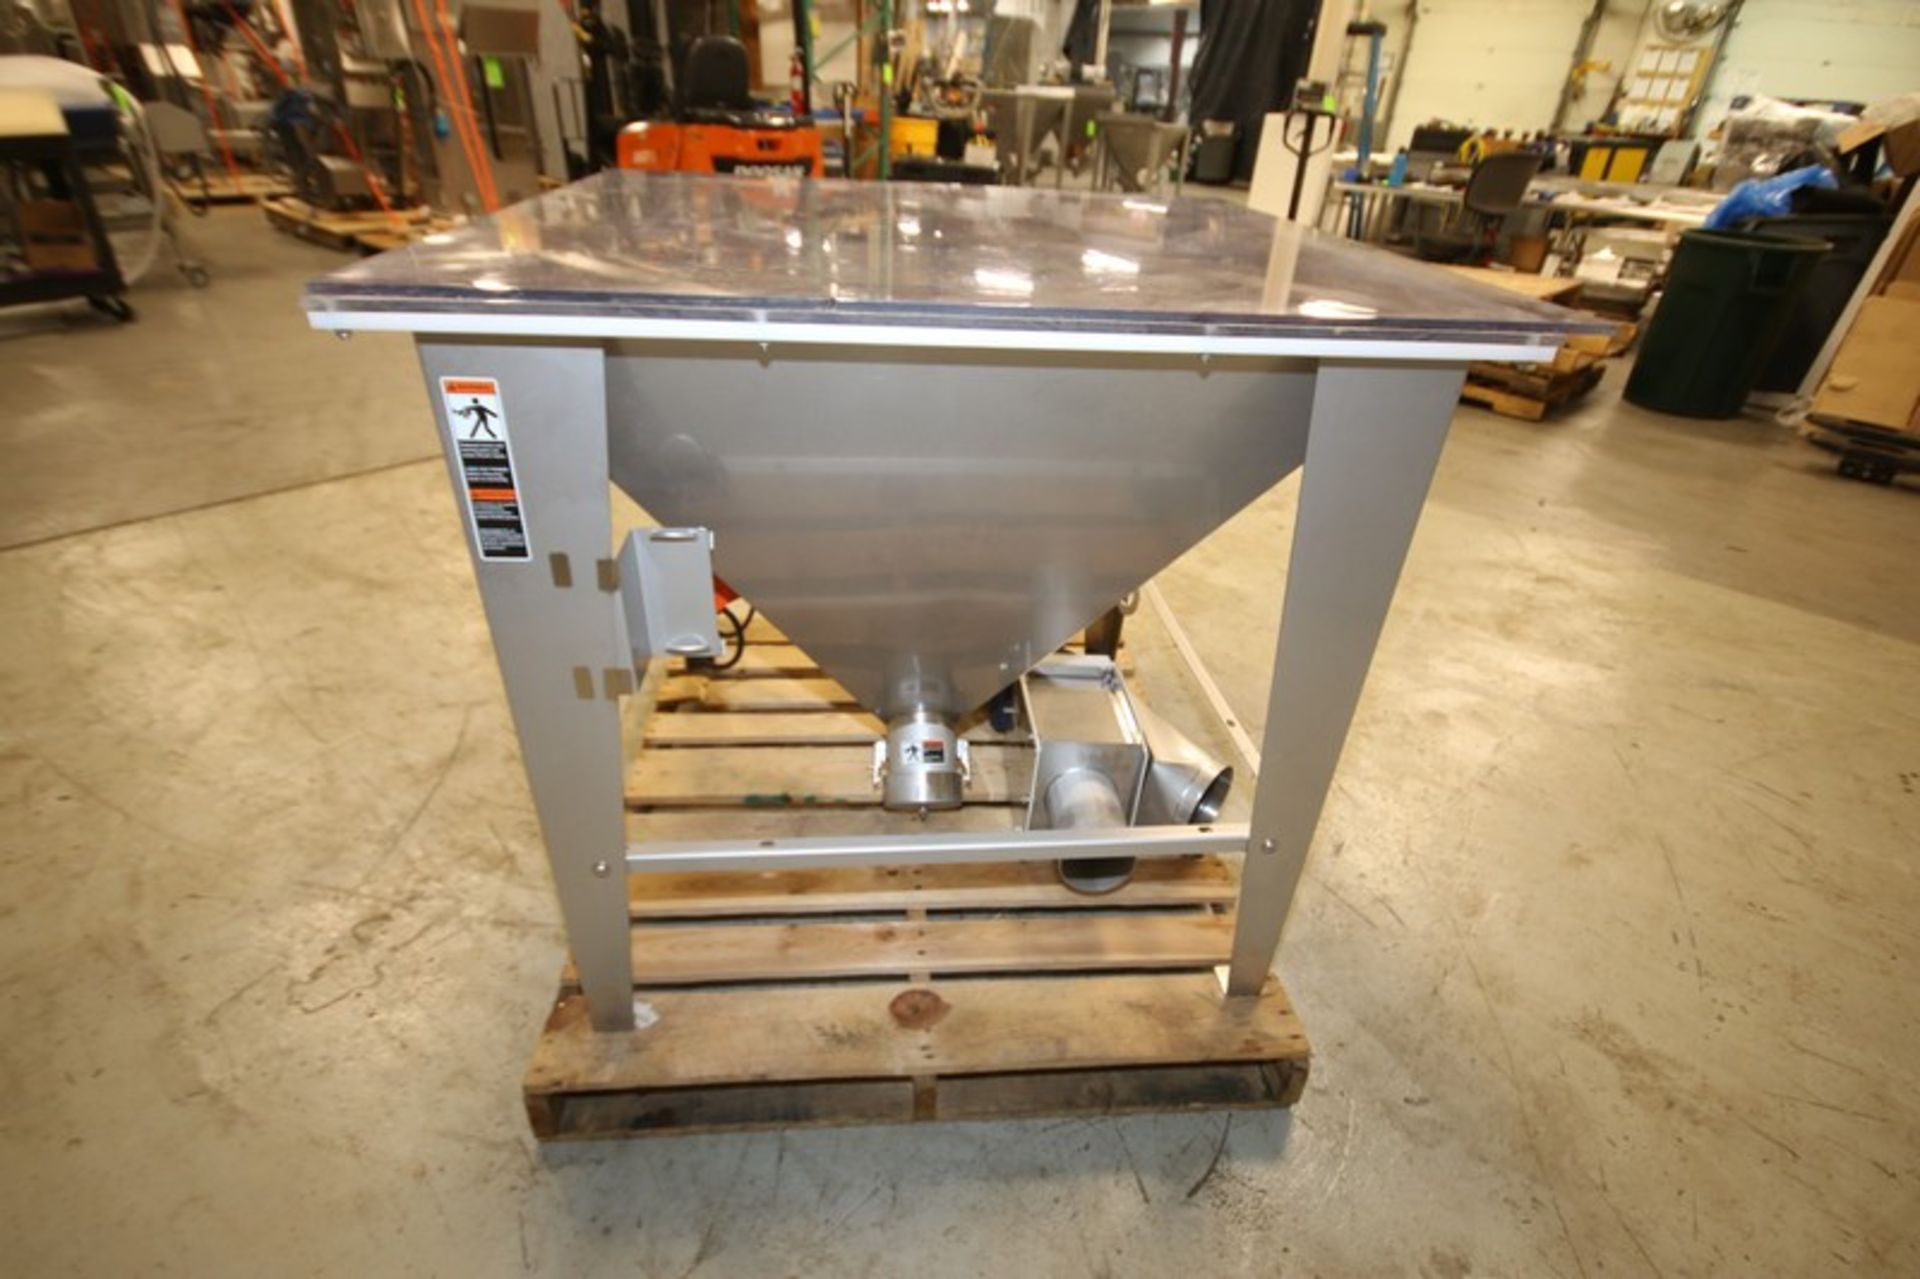 Hapman 36" x 36" x 36" H S/S Feed Hopper, SN K16540 CA, with S/S Safety Cage, Plexiglass Cover, 4" - Image 4 of 9